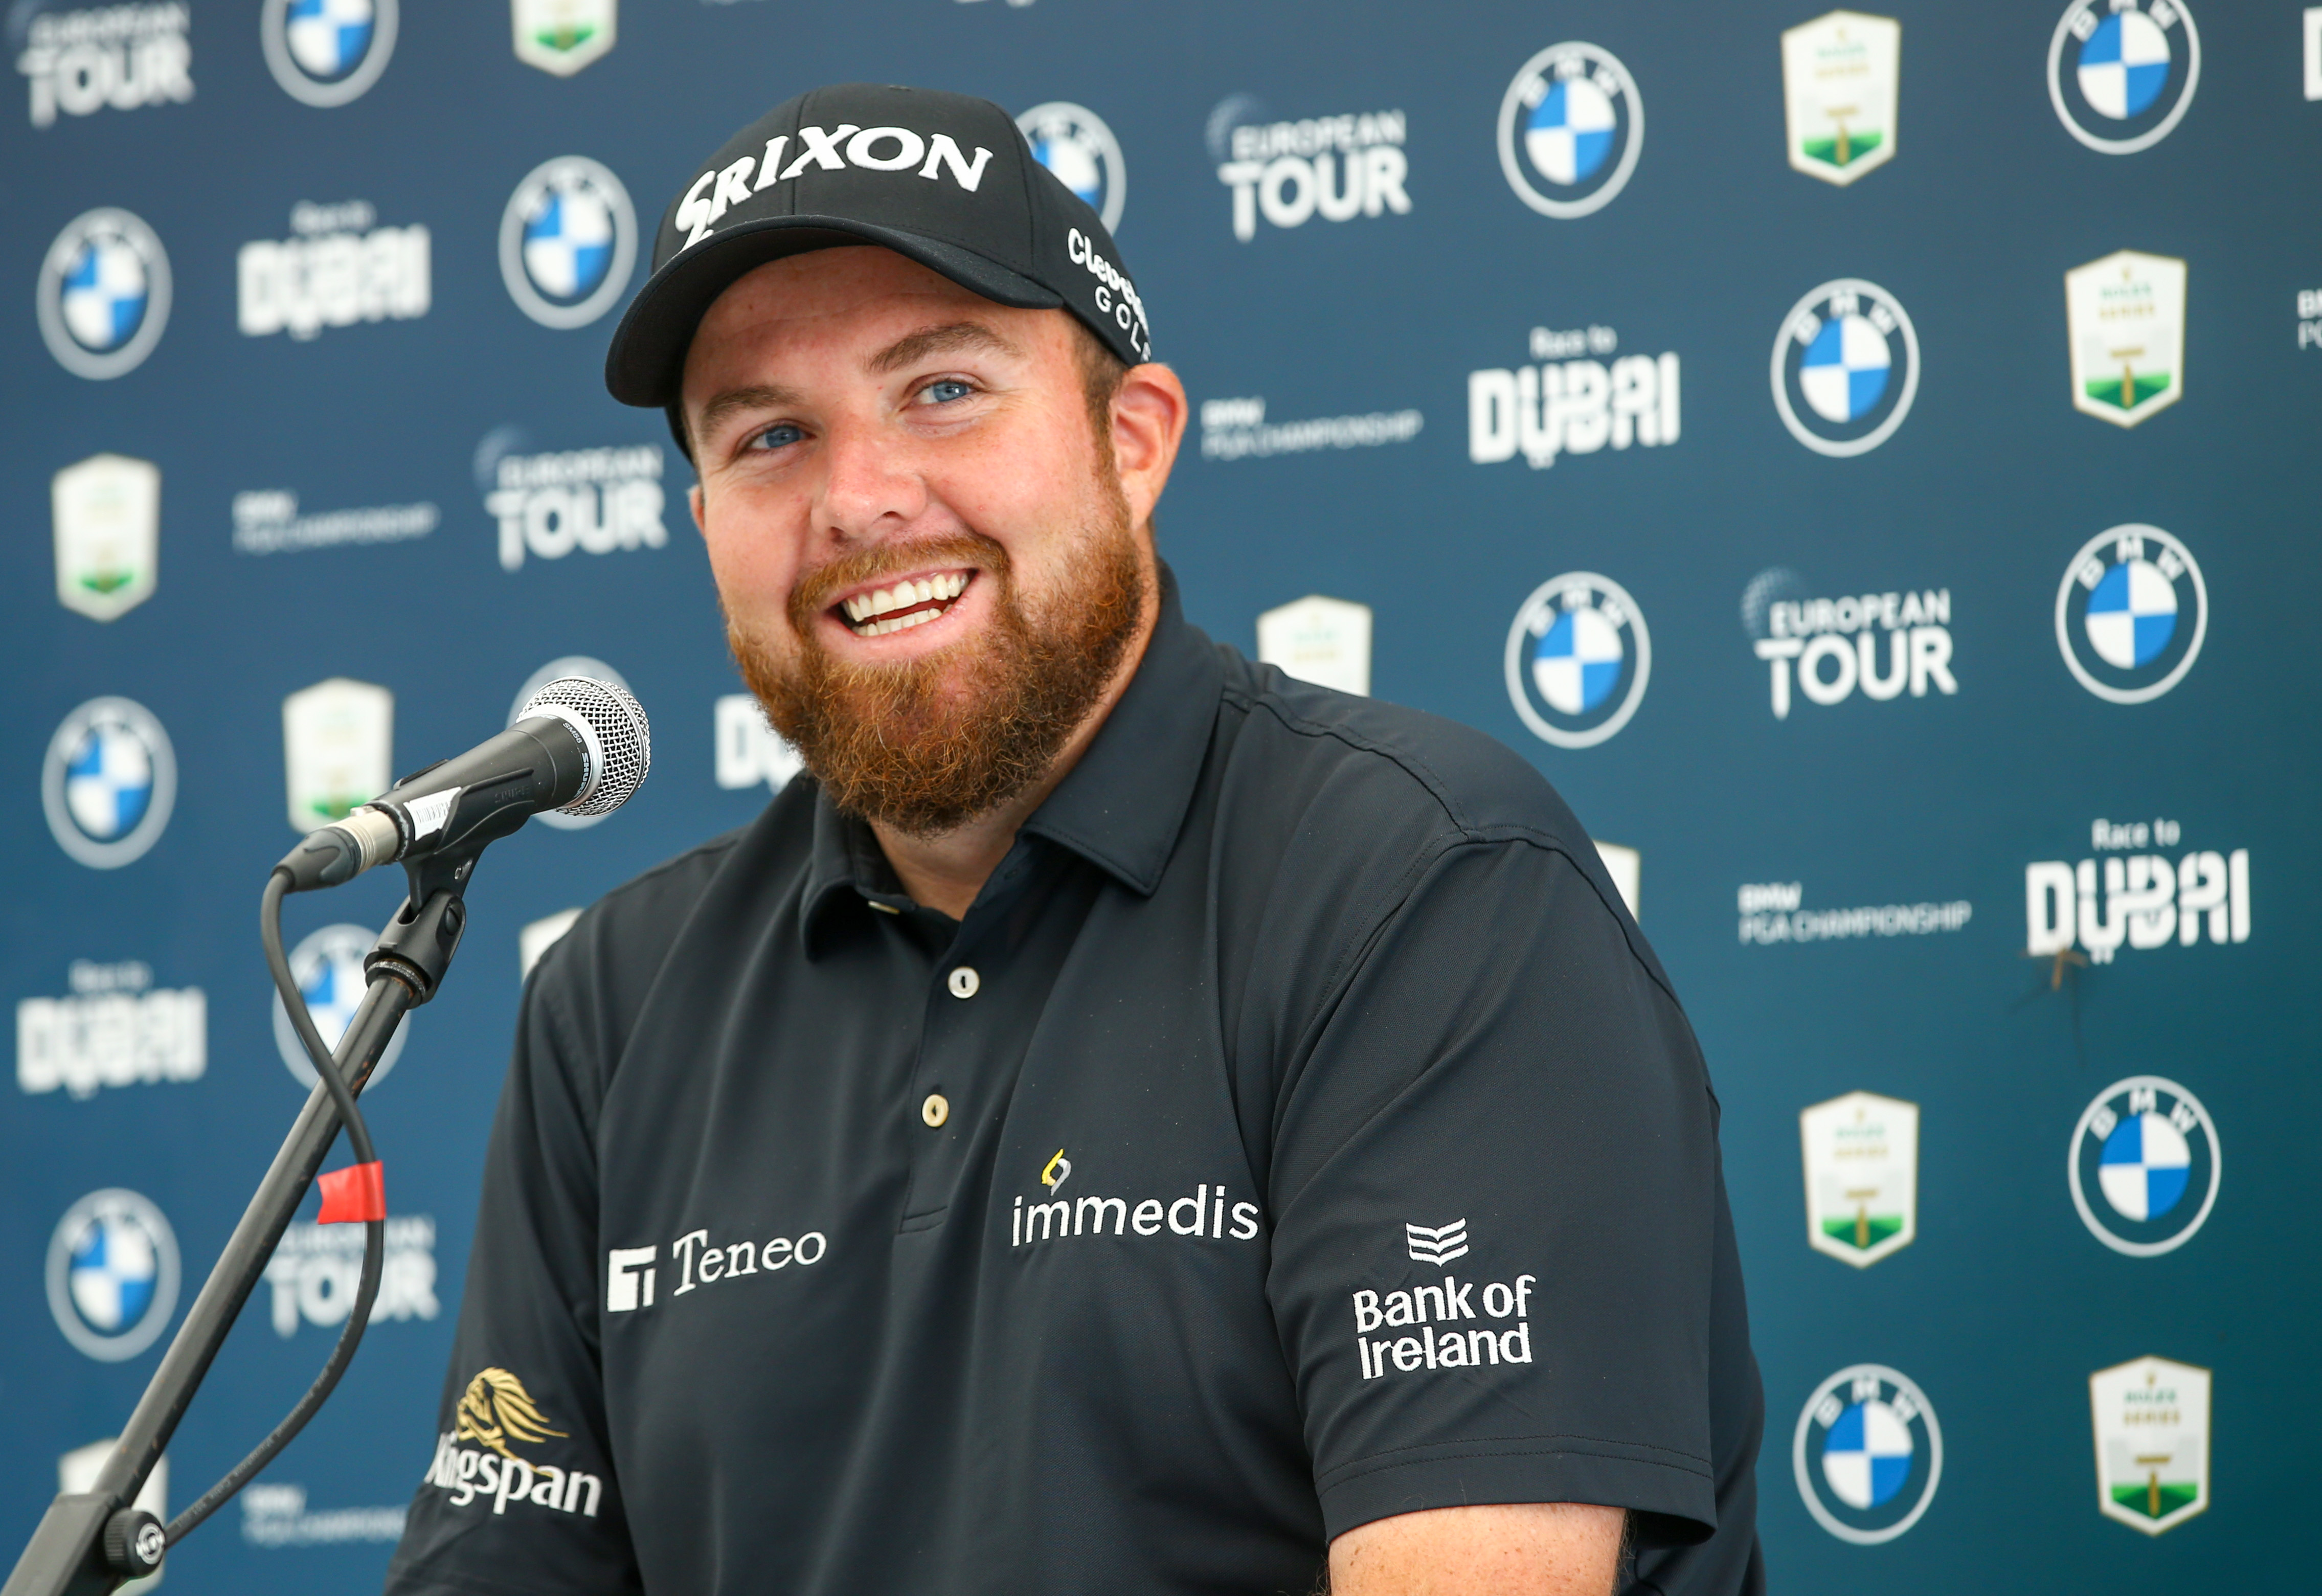 Shane Lowry returns to BMW PGA hoping to lock up final Europe qualifying spot for Ryder Cup Golf News and Tour Information GolfDigest